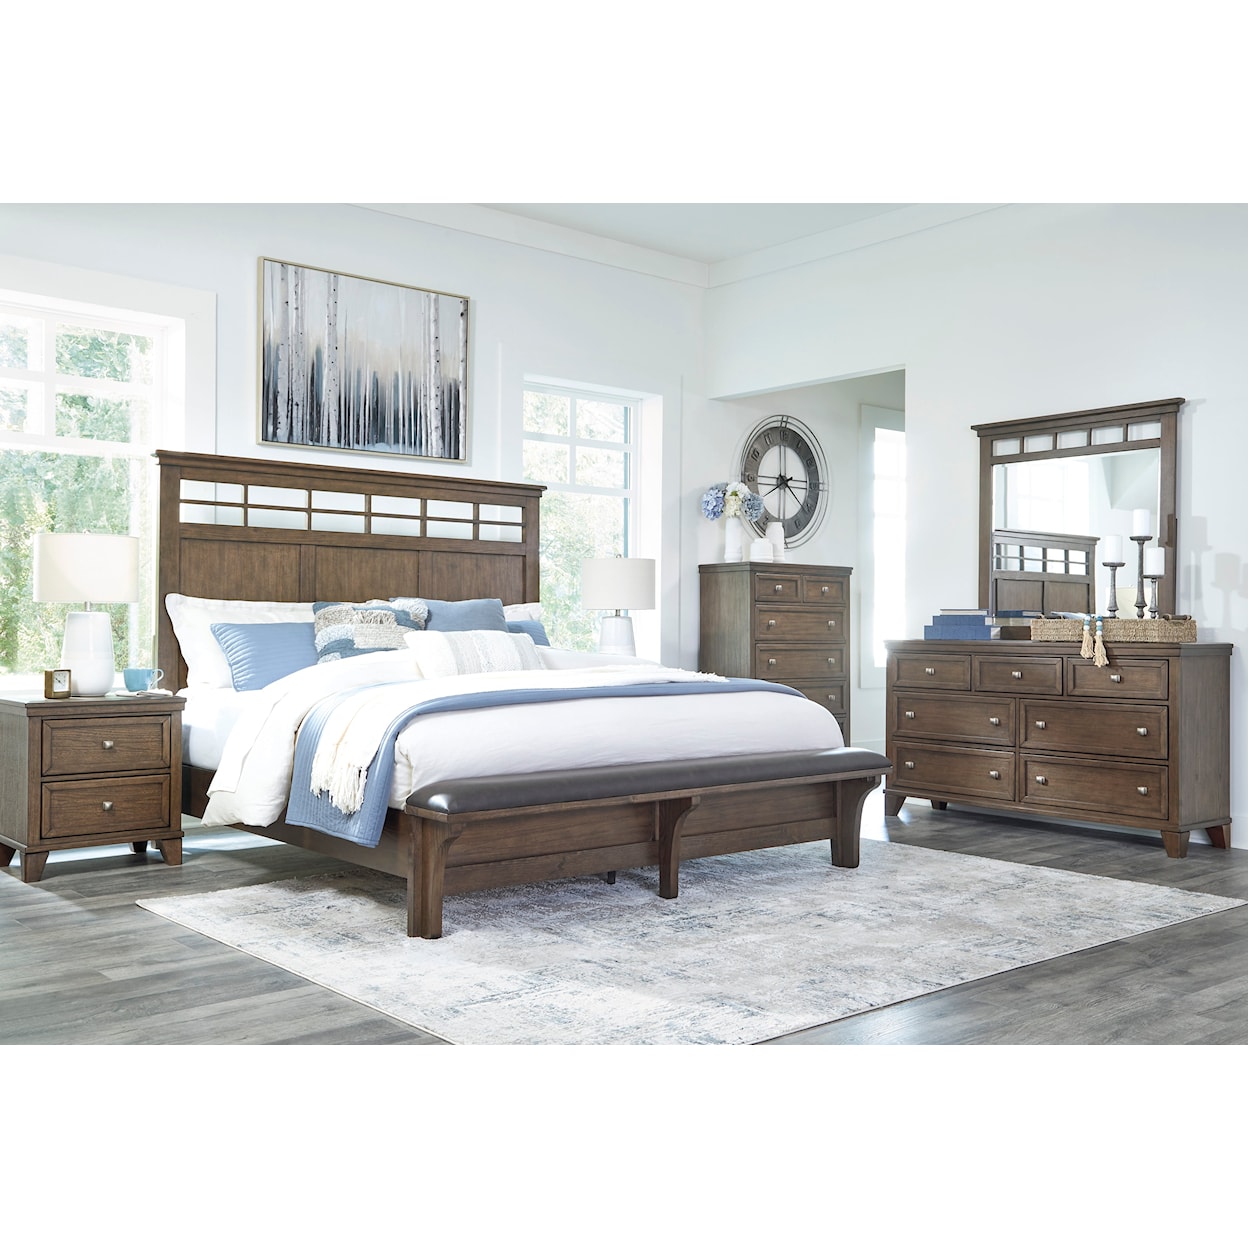 Benchcraft by Ashley Shawbeck Queen Bedroom Set